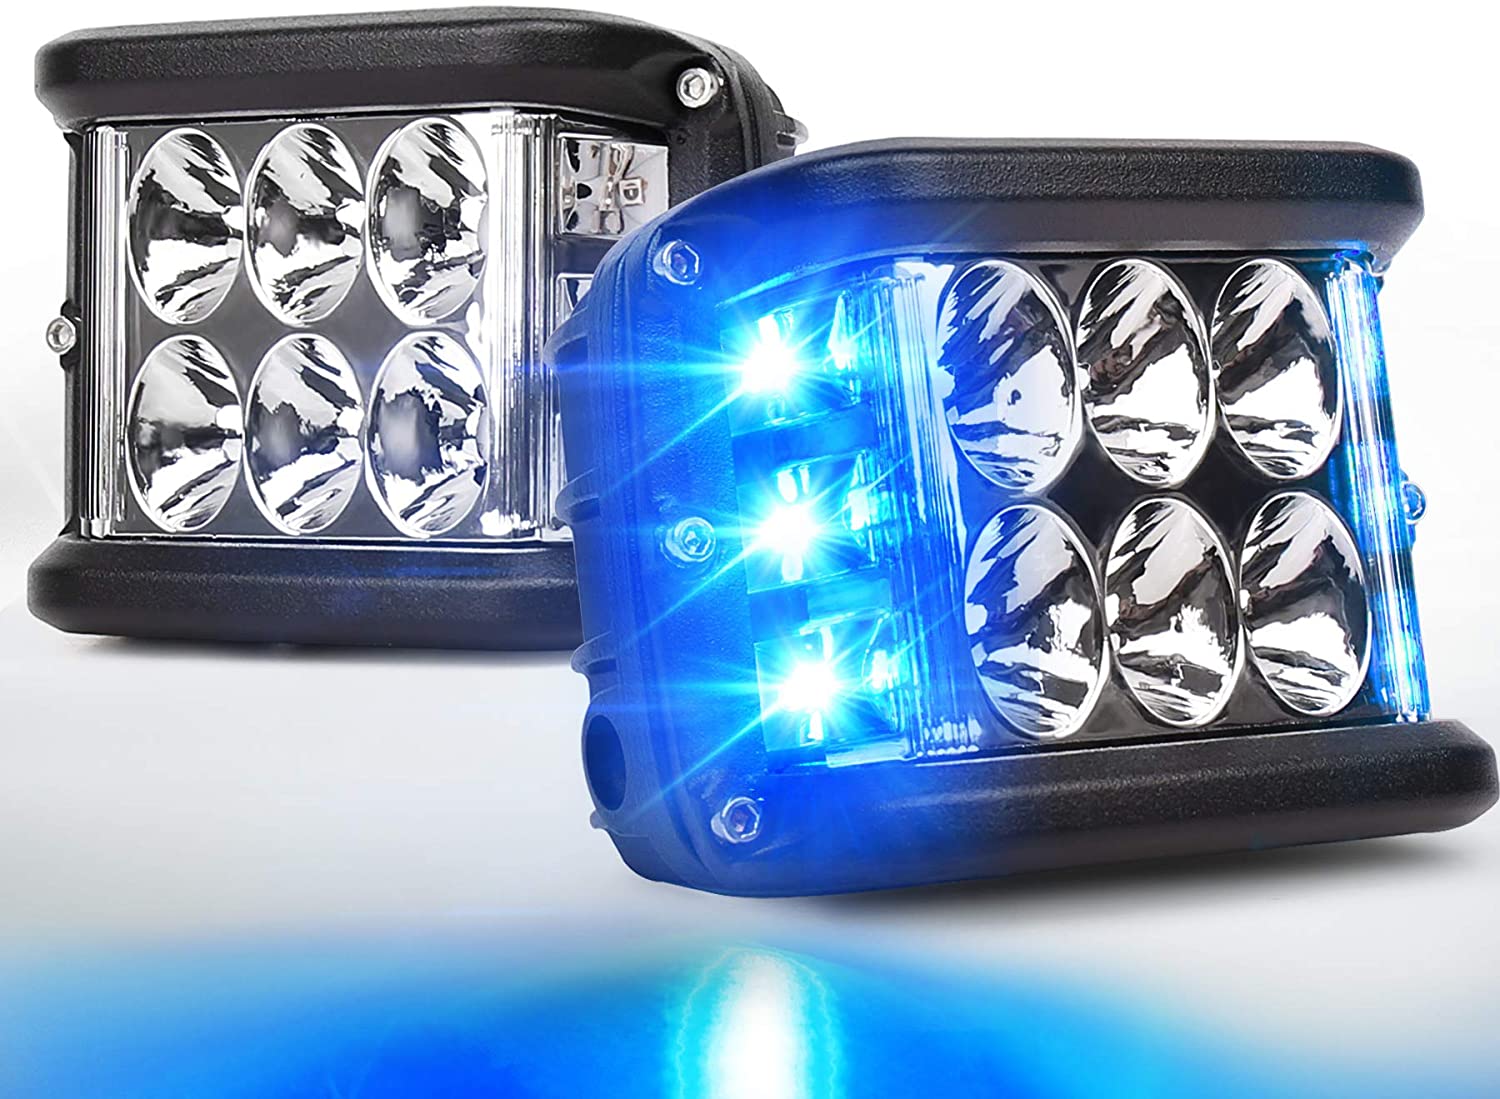 Side Shooter LED Lights with Dual Side Blue DRL with Strobe, 30W Off Road Flood Spot Driving Light Pods for Jeep Truck SUV ATV UTV 4x4